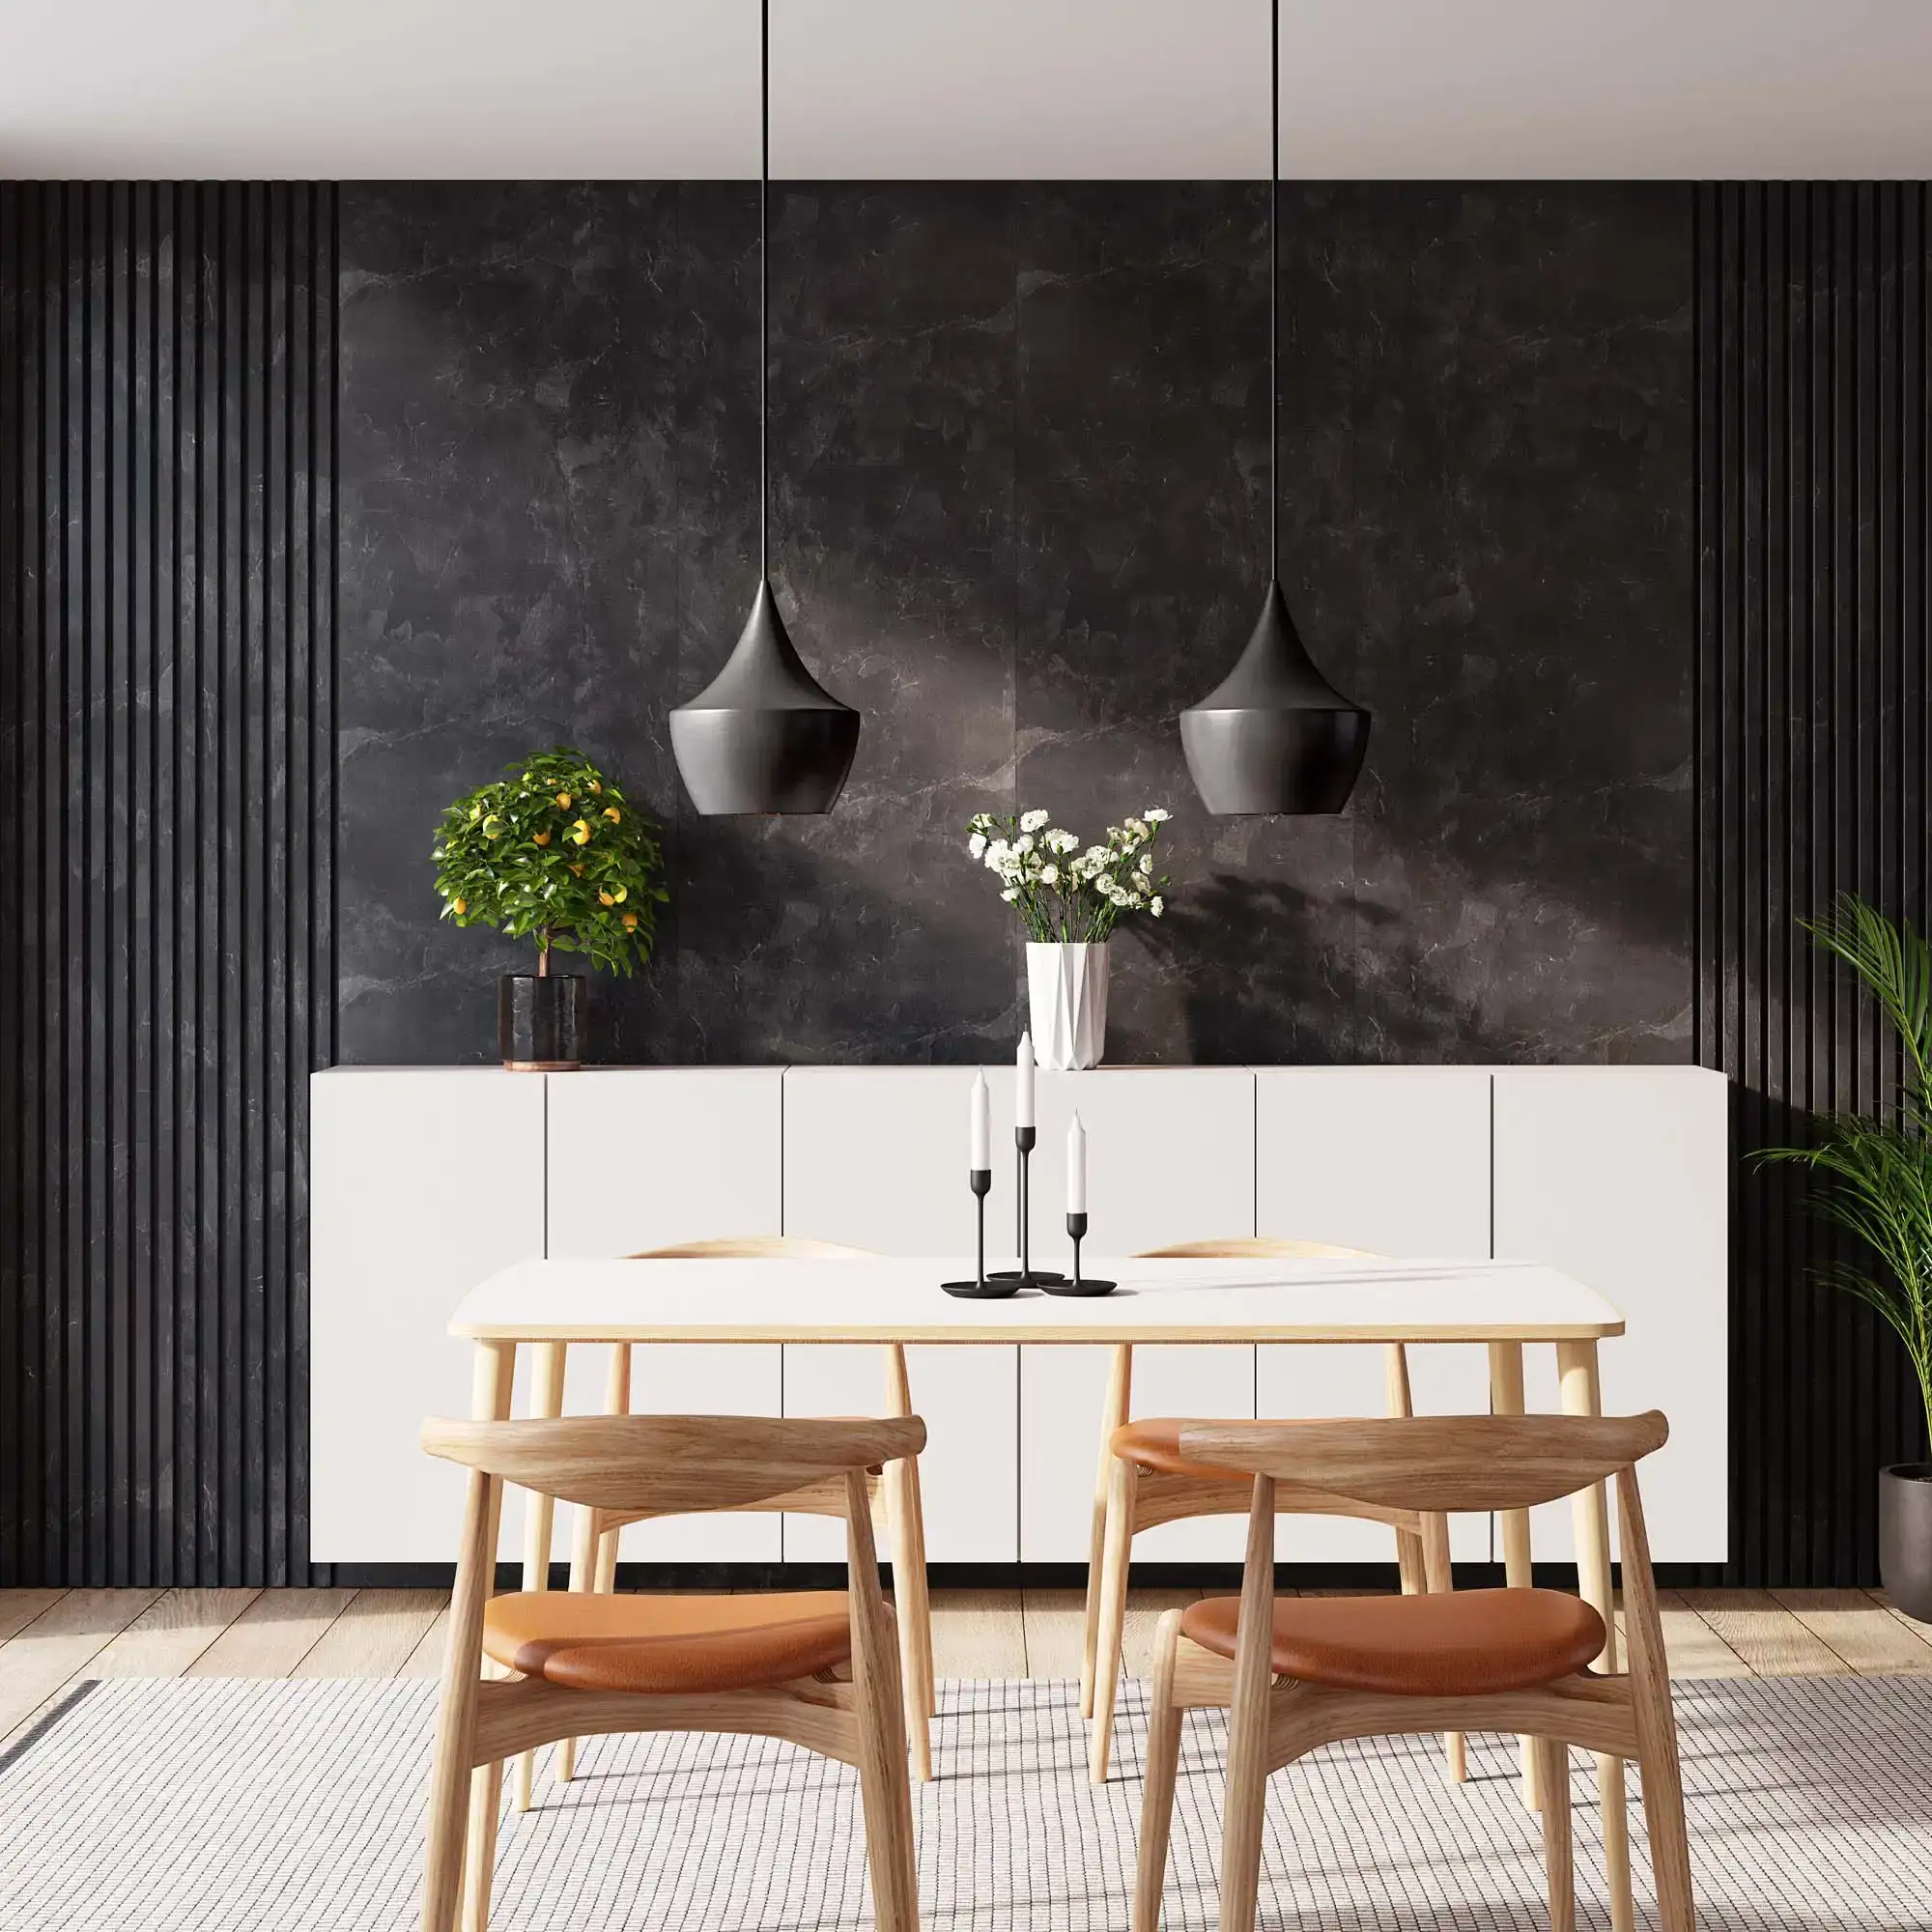 WS-Design Black Slate and Ribbon-Design Black Slate with Black RecoSilent in dining room